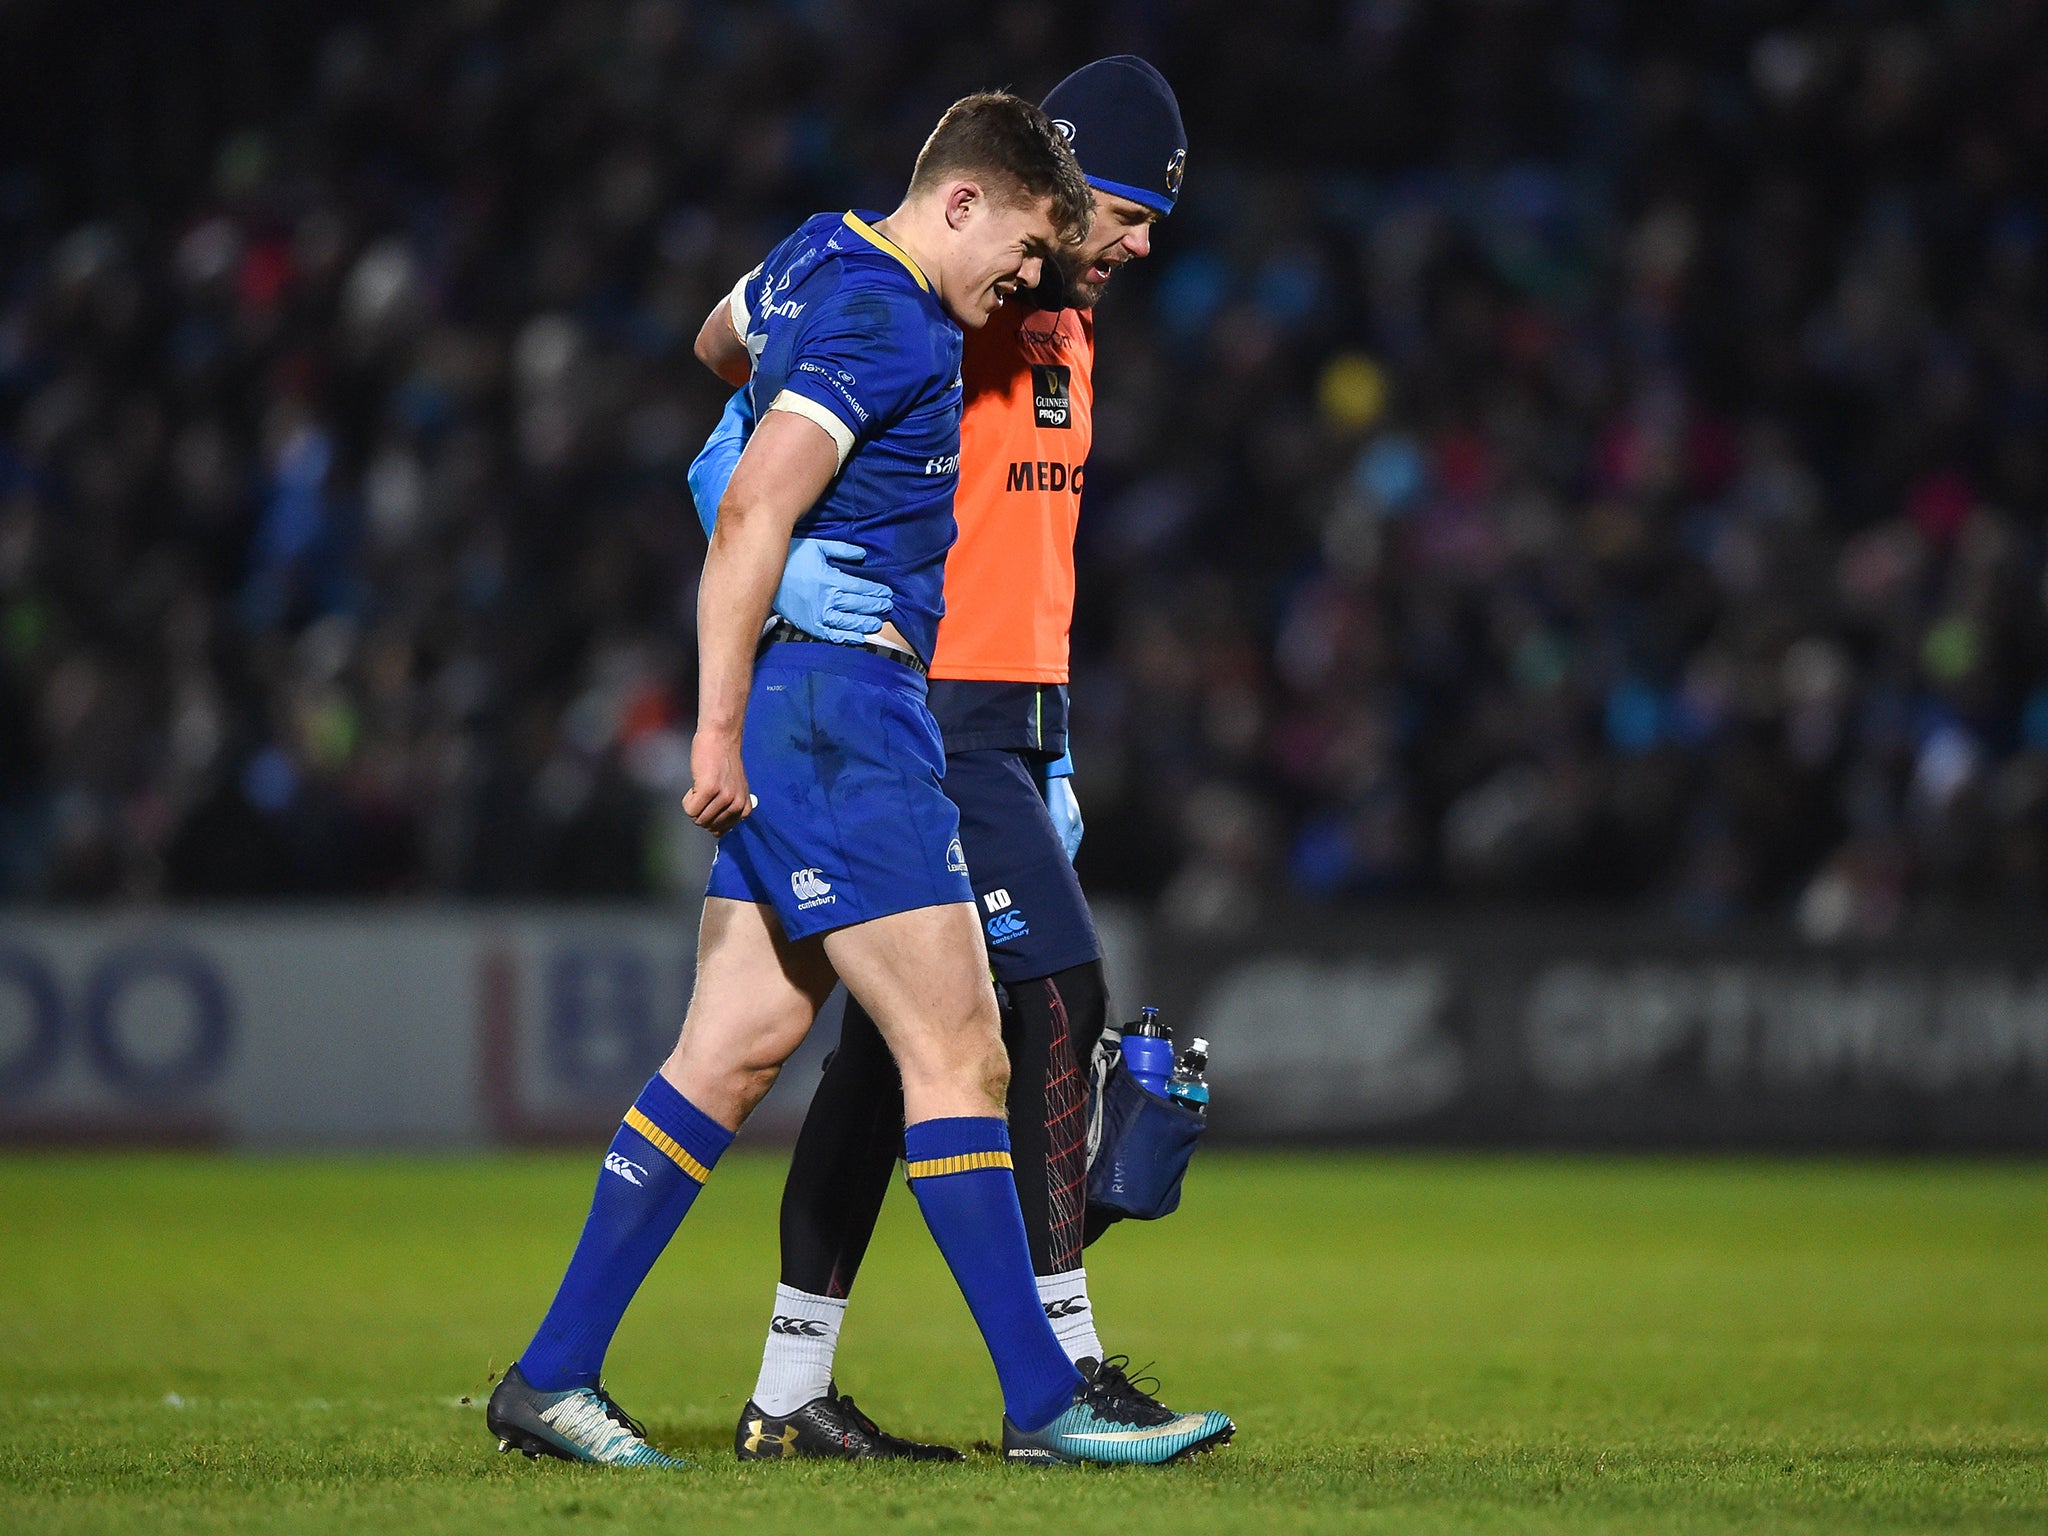 Garry Ringrose will miss the start of the Six Nations for Ireland